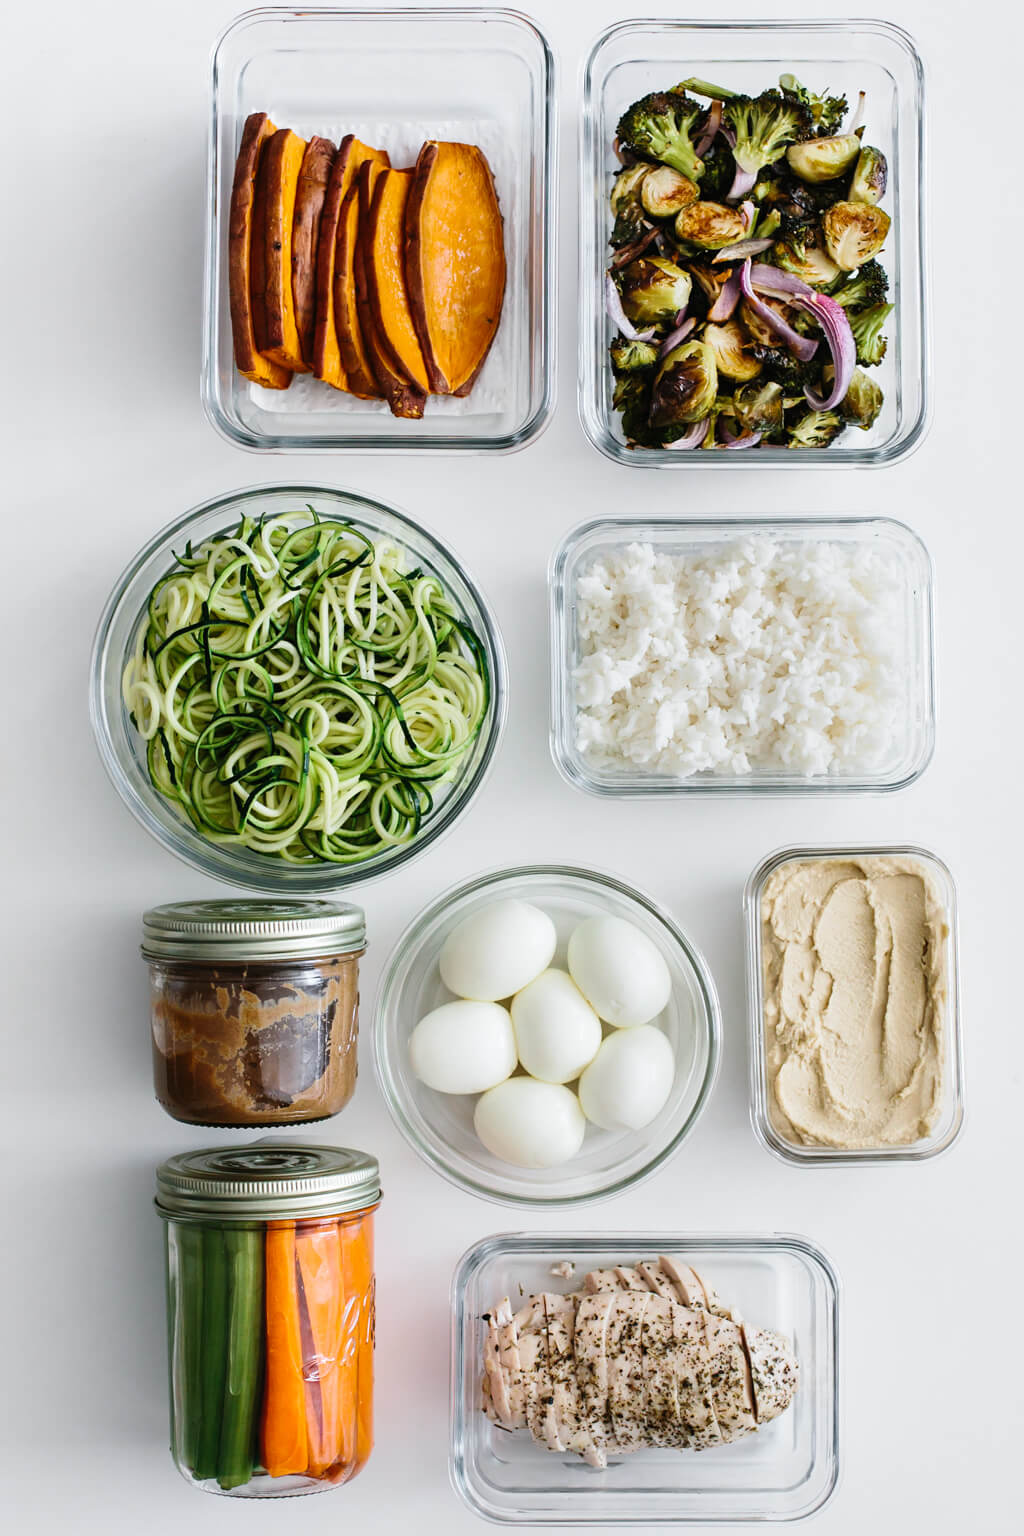 Meal prep and save time in the kitchen. Here are 9 ingredients to meal prep and several meal prep ideas for healthy recipes. 